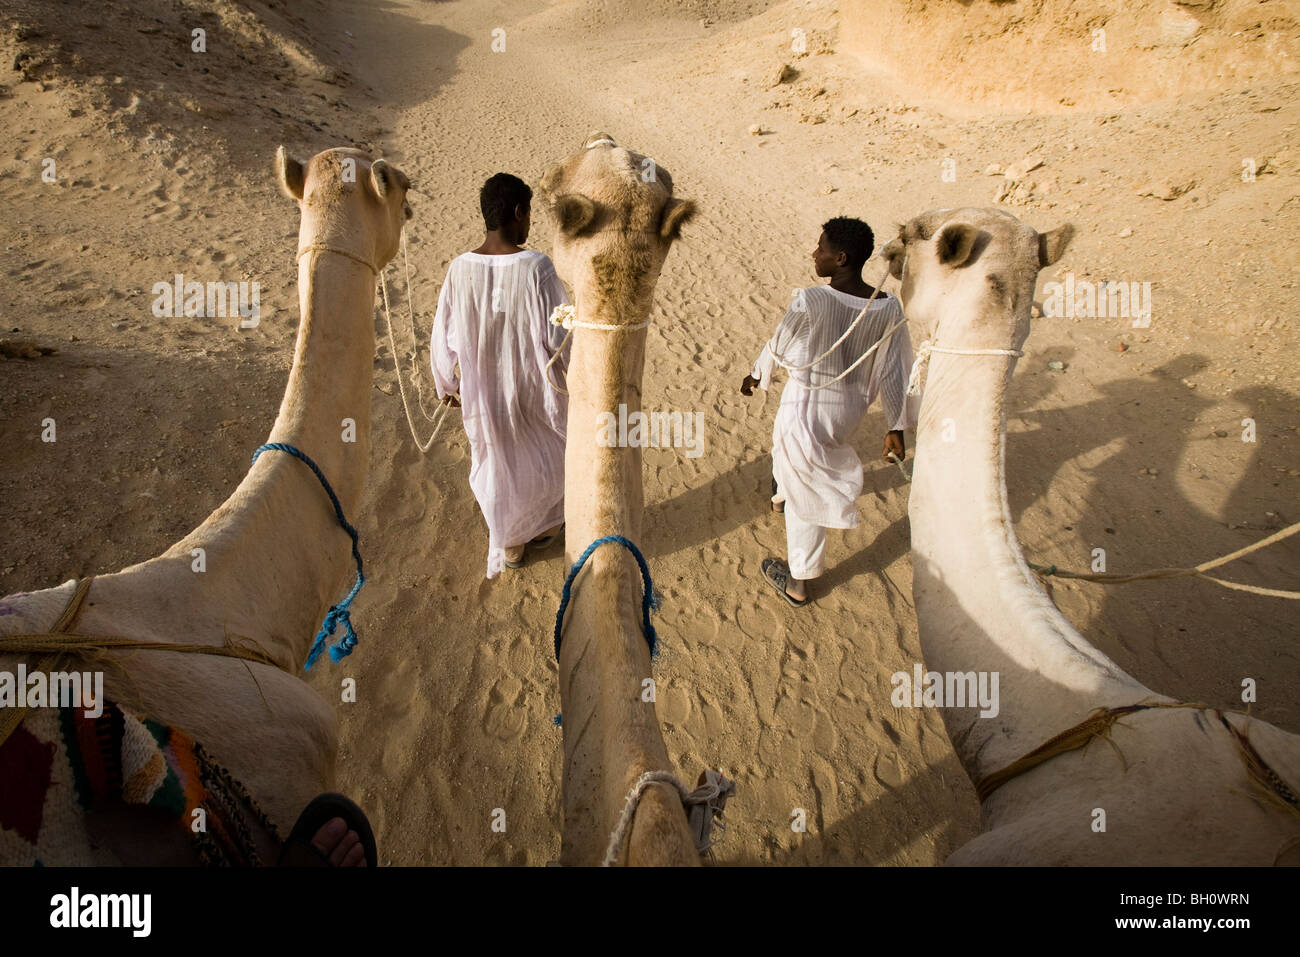 Camels and young Bedouins in the desert, Red Sea, Marsa Alam, Egypt Stock Photo